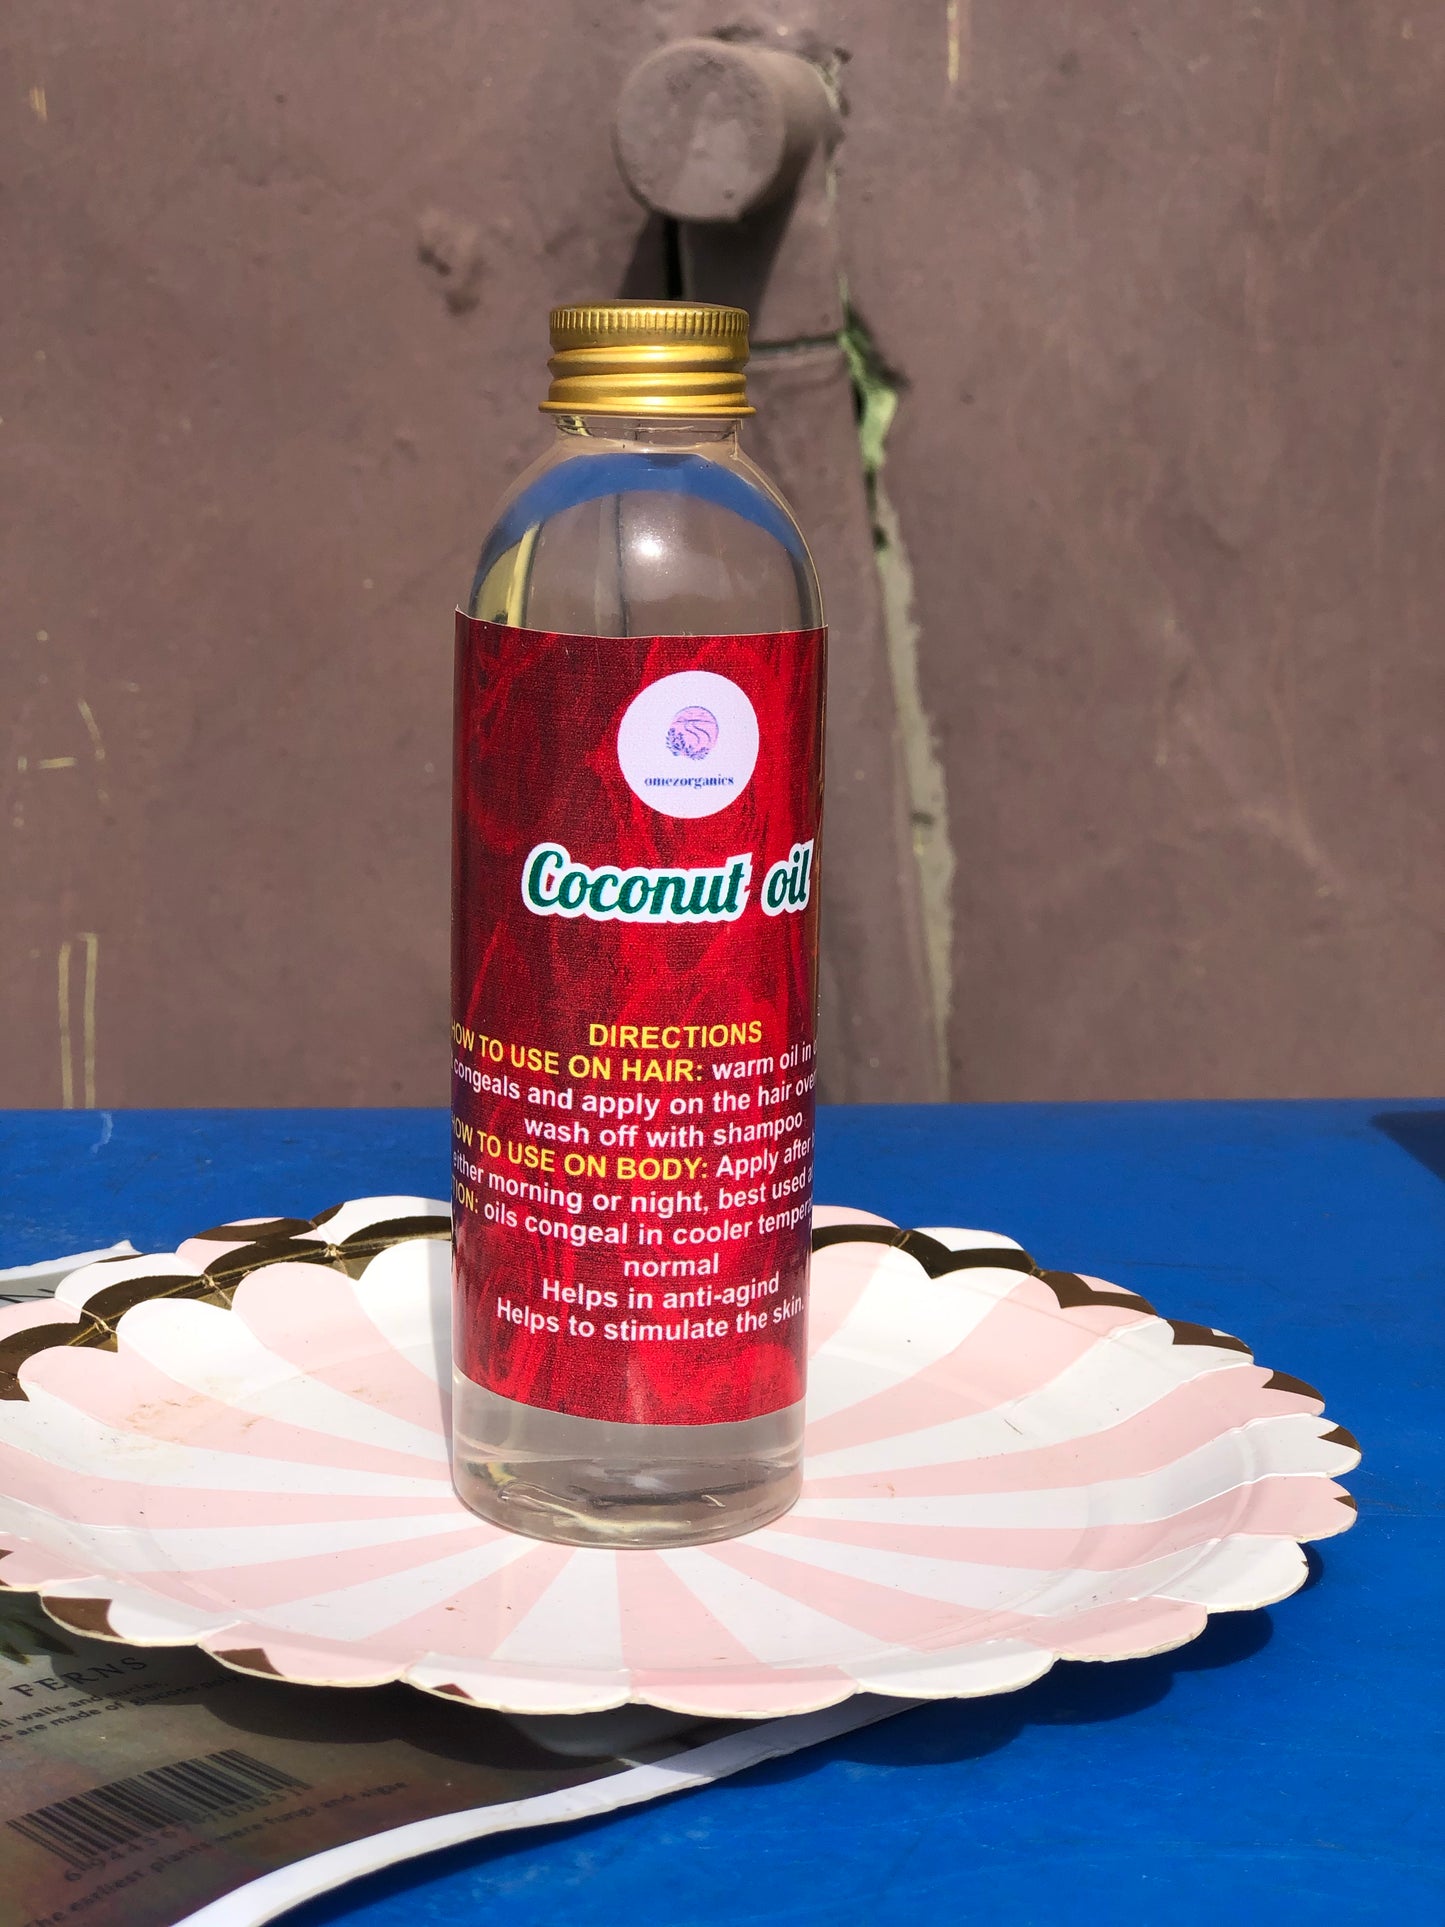 Coconut oil - omez beauty products 